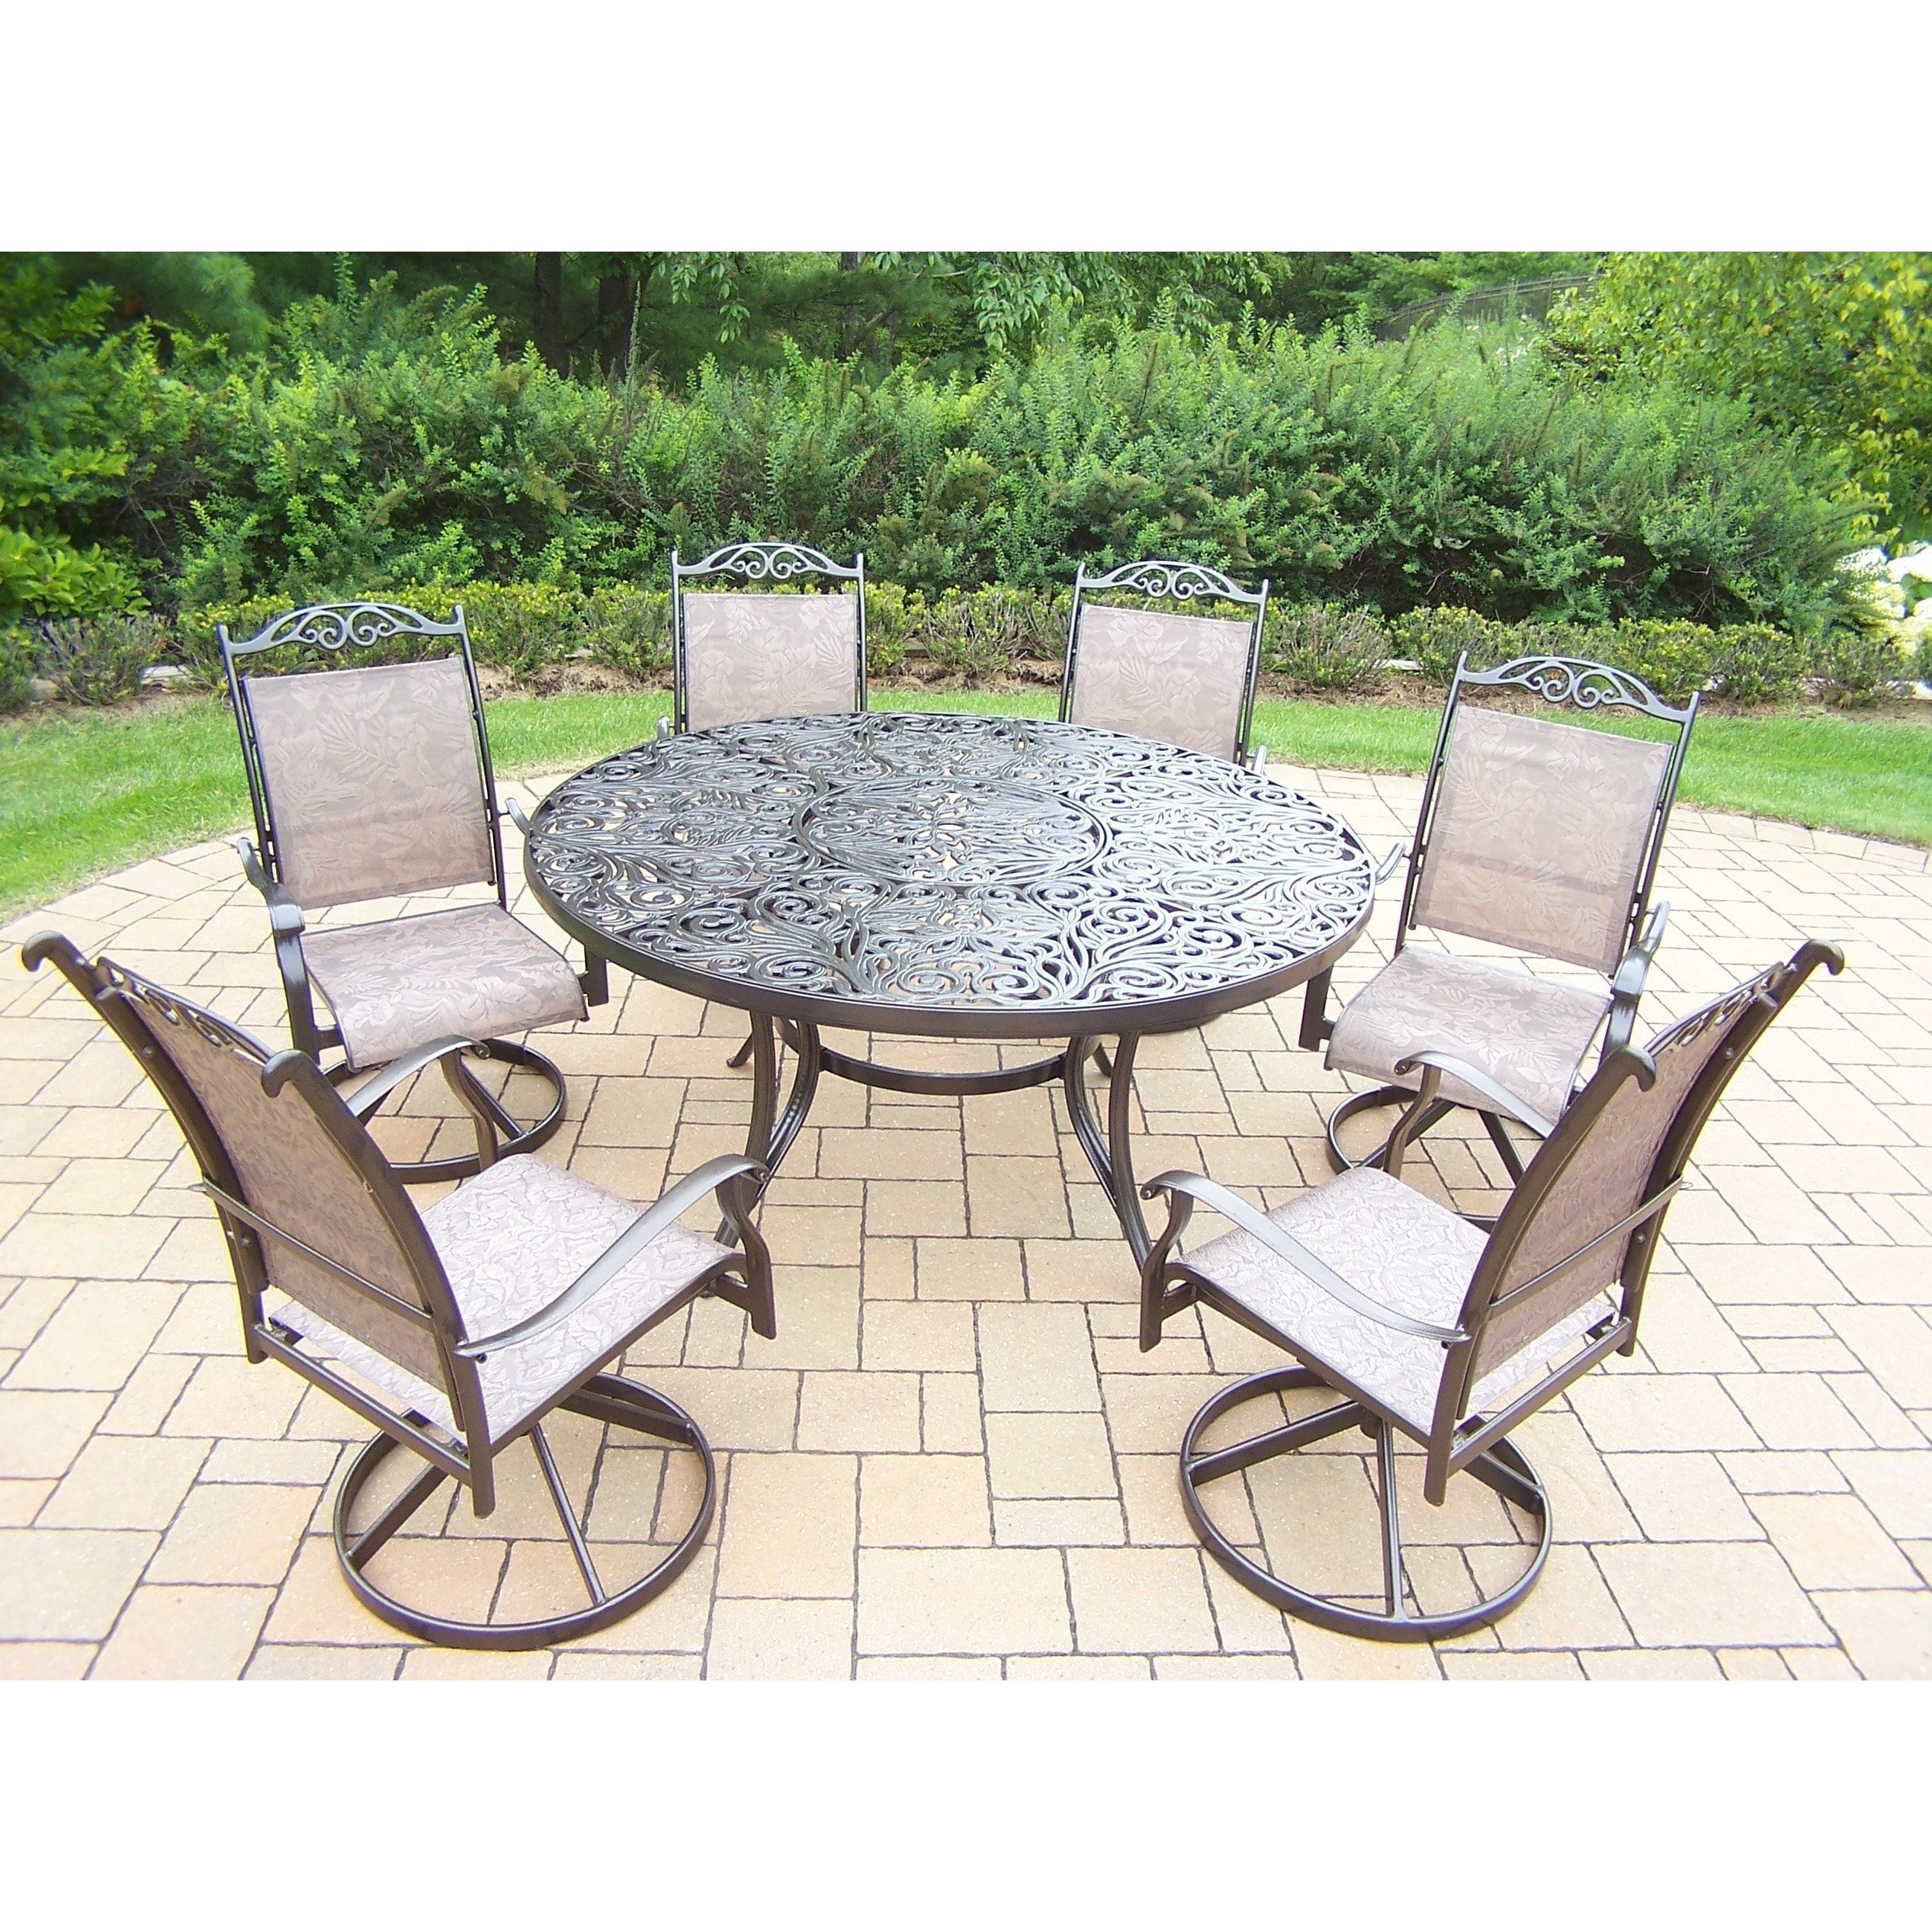 Aluminum 7 Piece Outdoor Patio Dining Set With 6 Swivel Brown 7 Piece Intended For 7 Piece Patio Dining Sets (View 6 of 15)